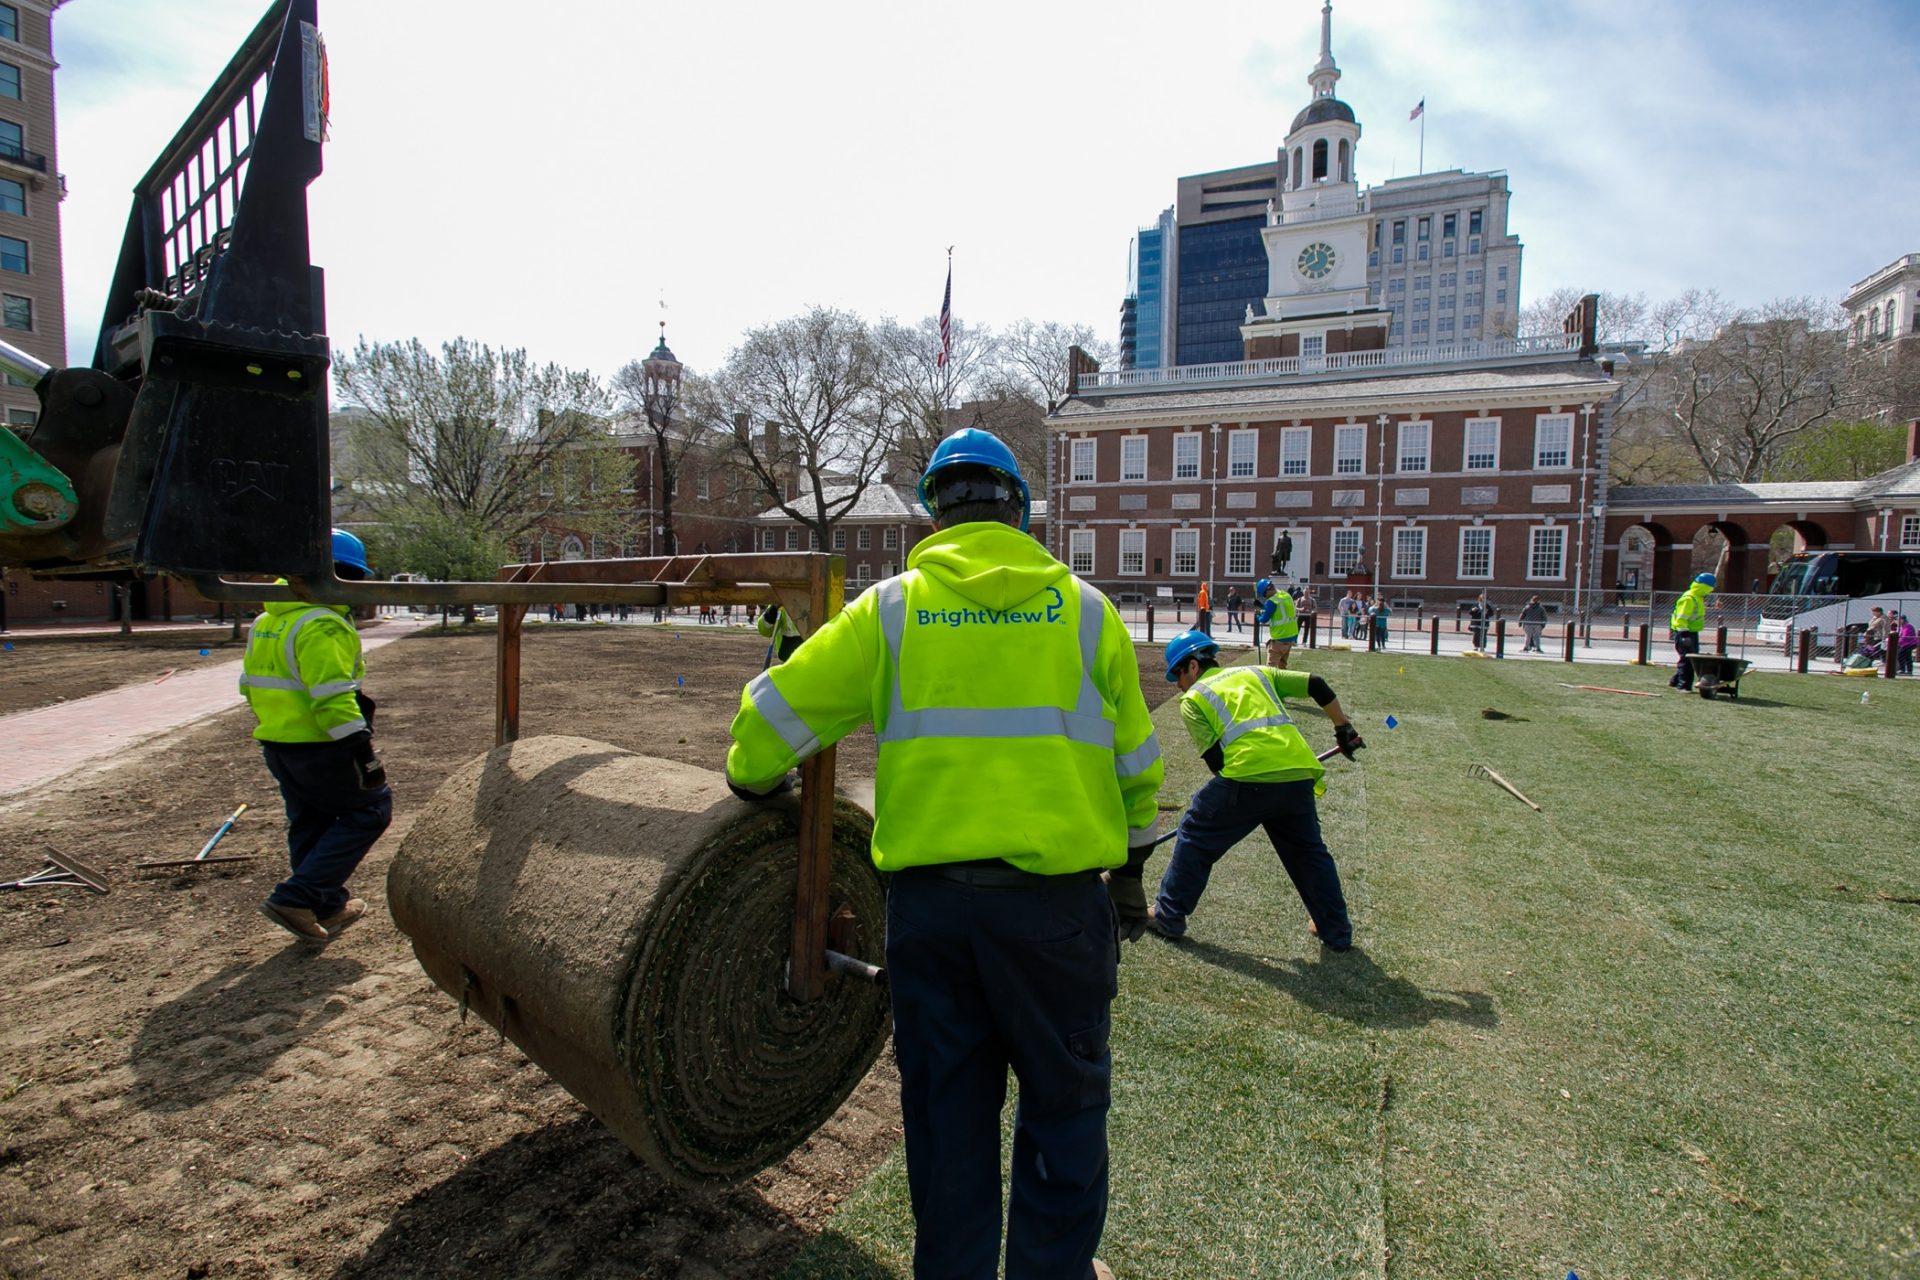 BrightView landscapers work on Independence Mall. Brightview has been the largest employer of H2B guest workers in the country for the last several years.